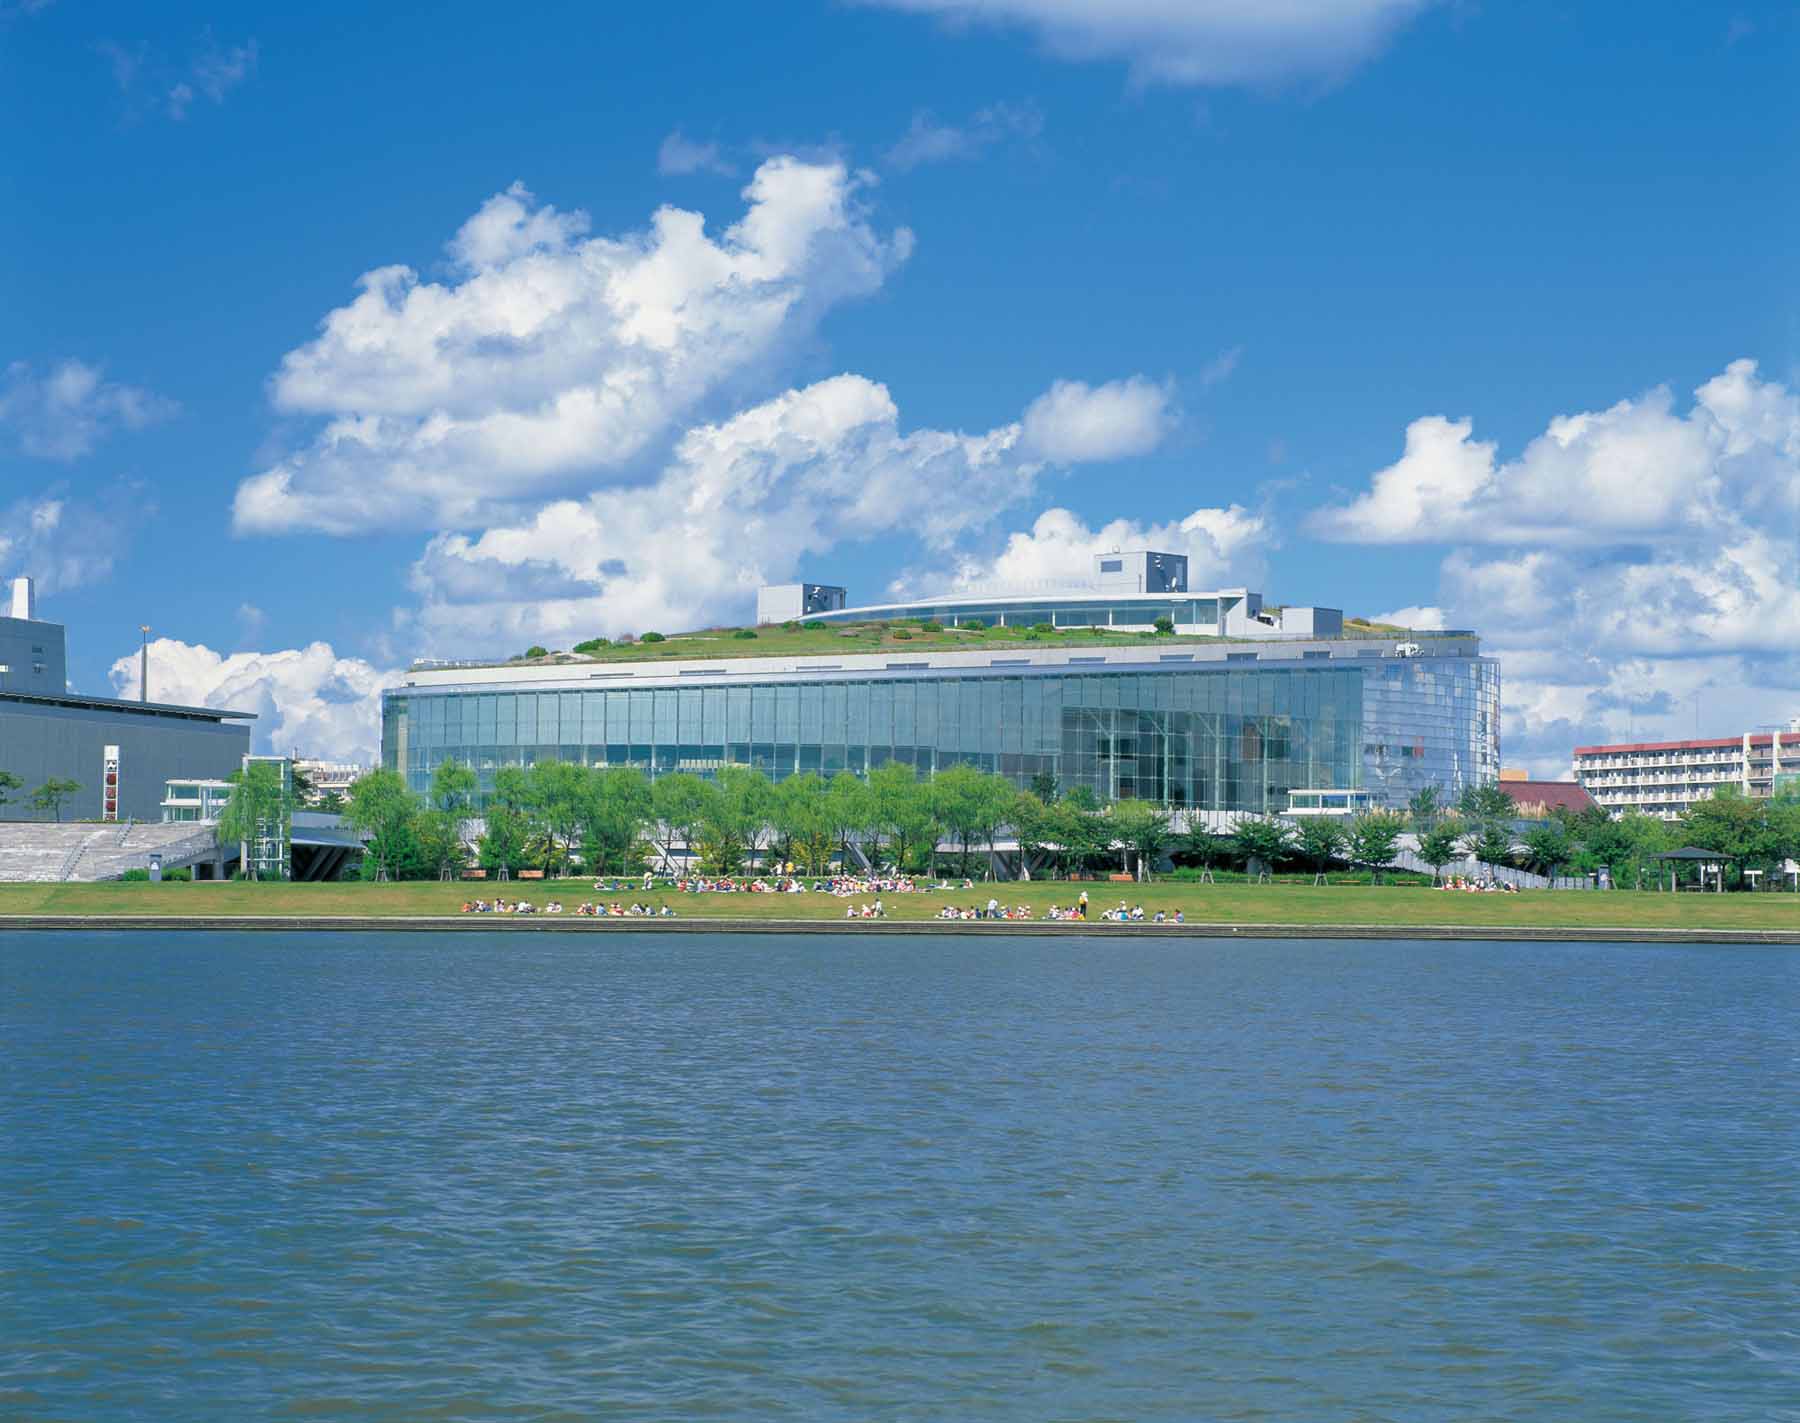 Main Building Viewed Across The Water, Niigata City Performing Arts Center, Japan By Itsuko Hasegawa Atelier, 1998